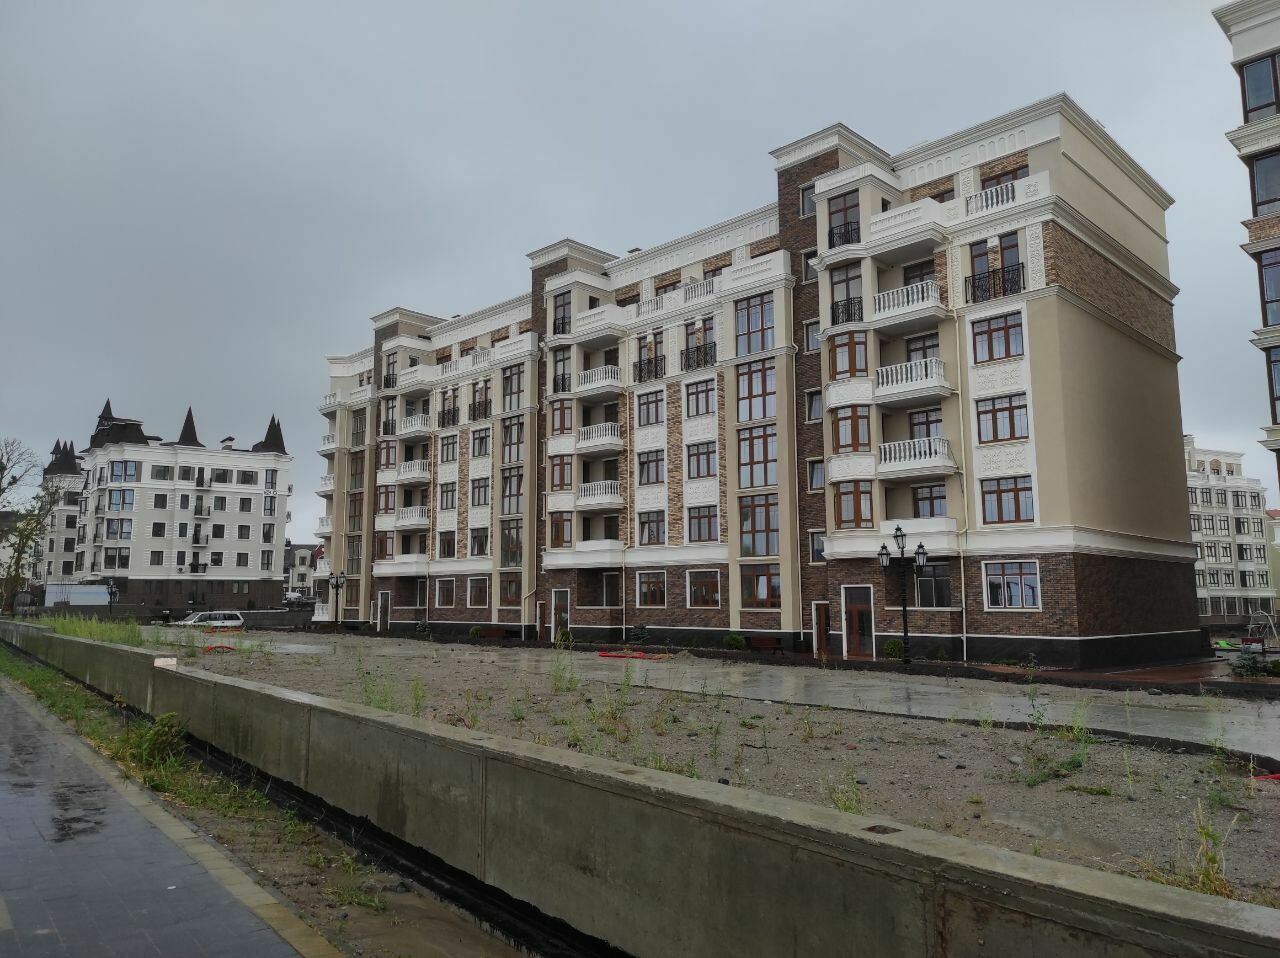 Sale in Kaliningrad style: how local authorities in the West of Russia sell land